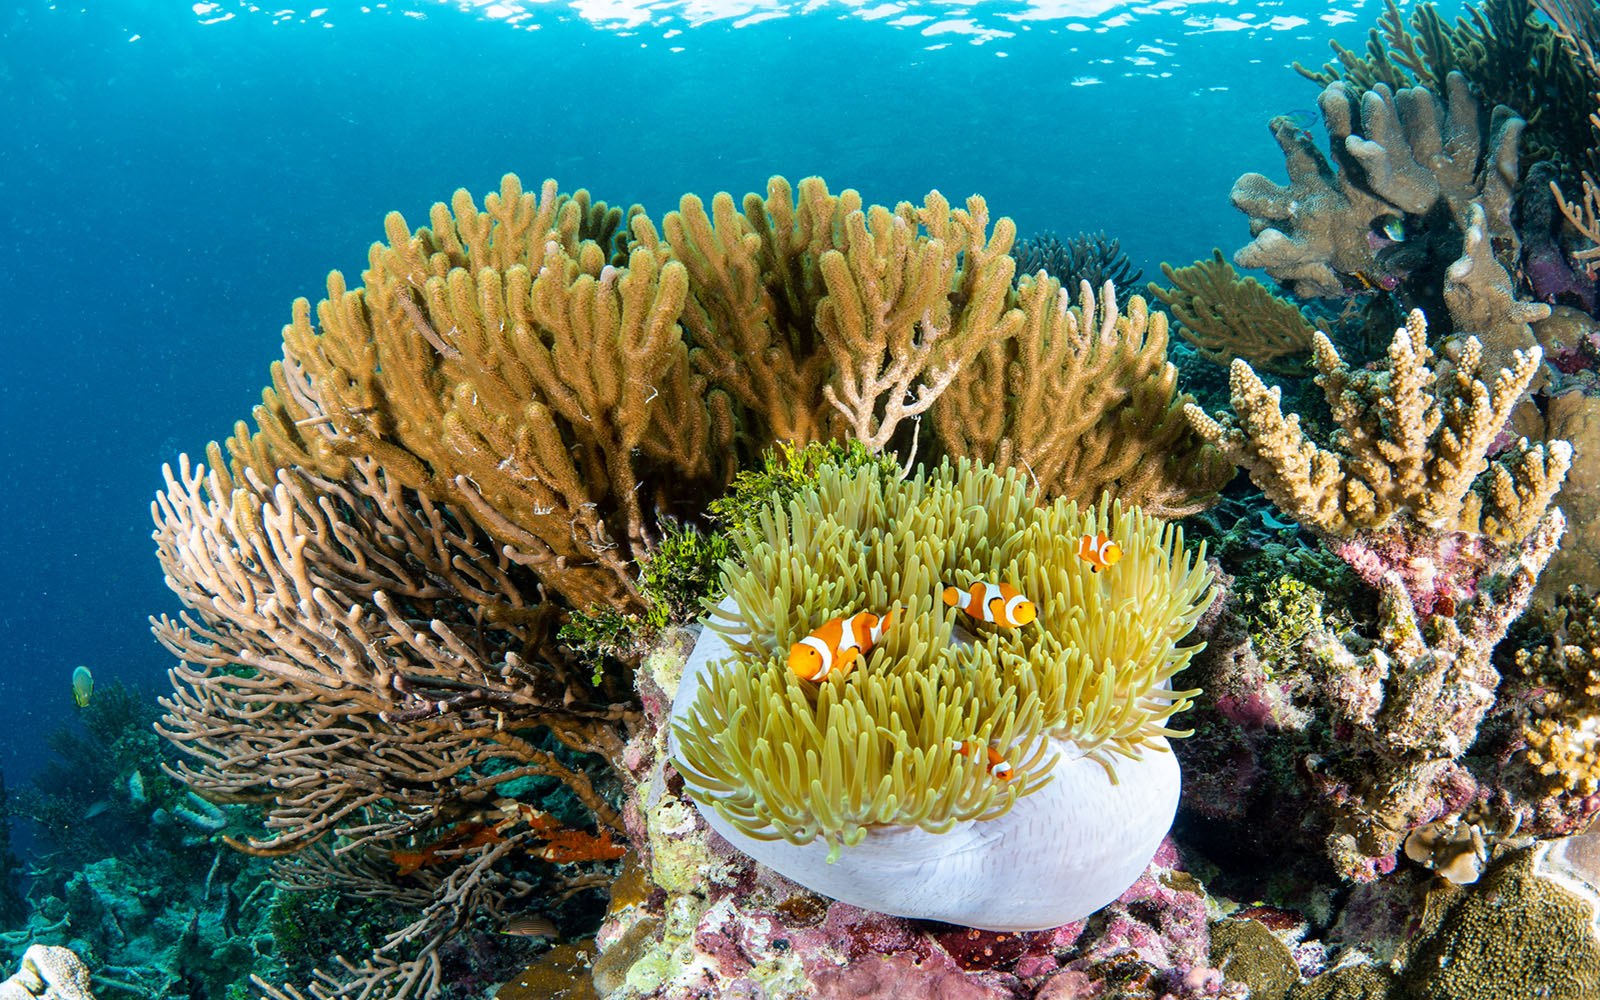 Anemonefish and soft coral photographed by Snorkel Vacations on a snorkeling trip to Raja Ampat